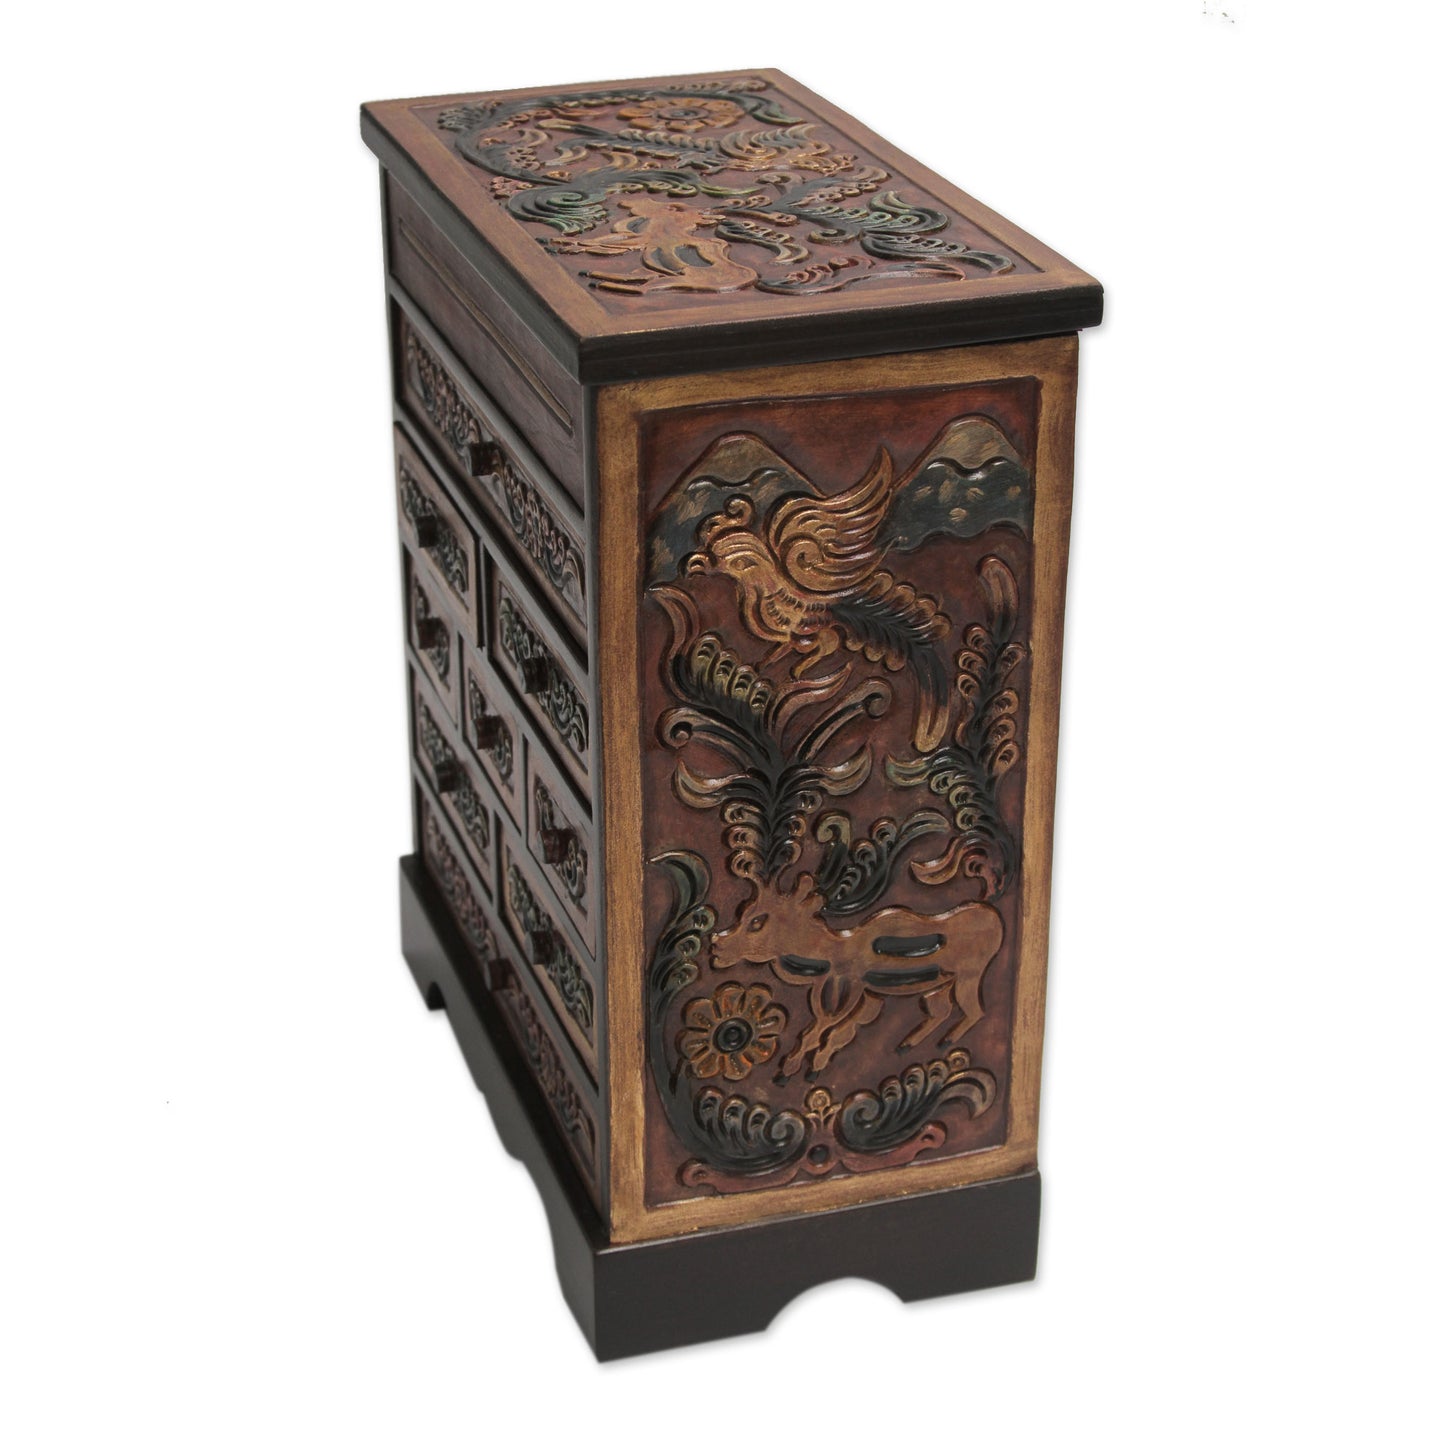 Nature's Glory Flora and Fauna Cedar and Leather Jewelry Box with Drawers